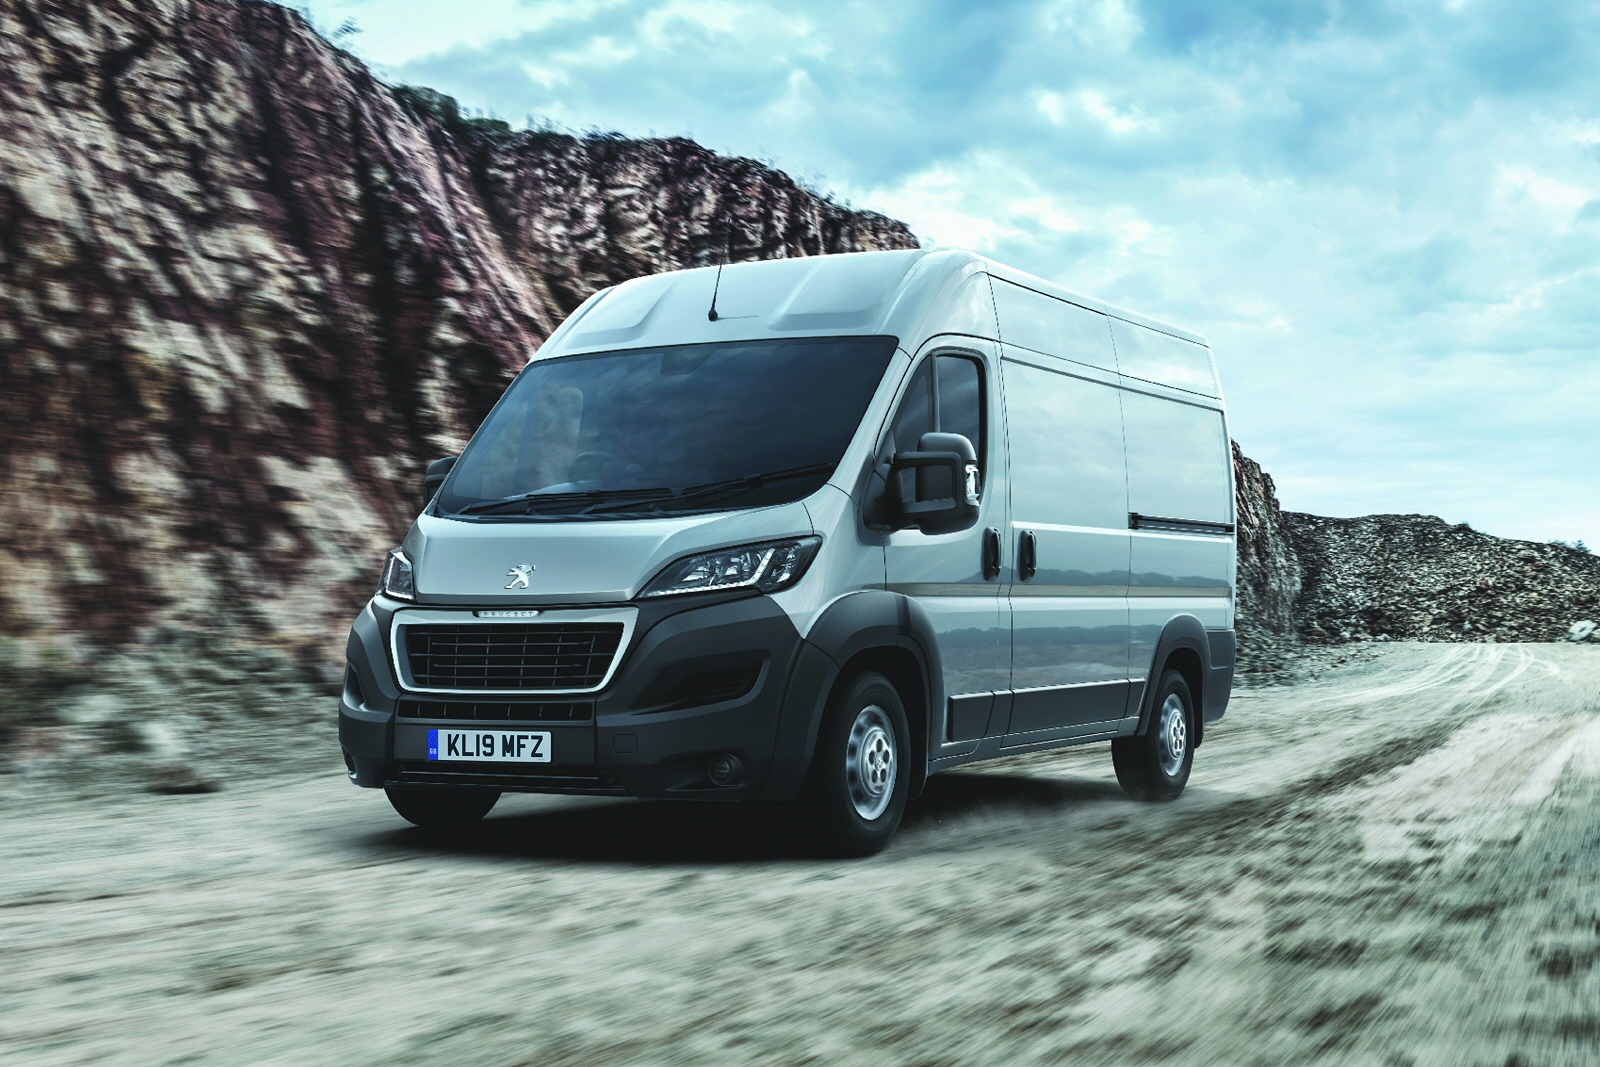 PEUGEOT BOXER Leasing & Contract Hire